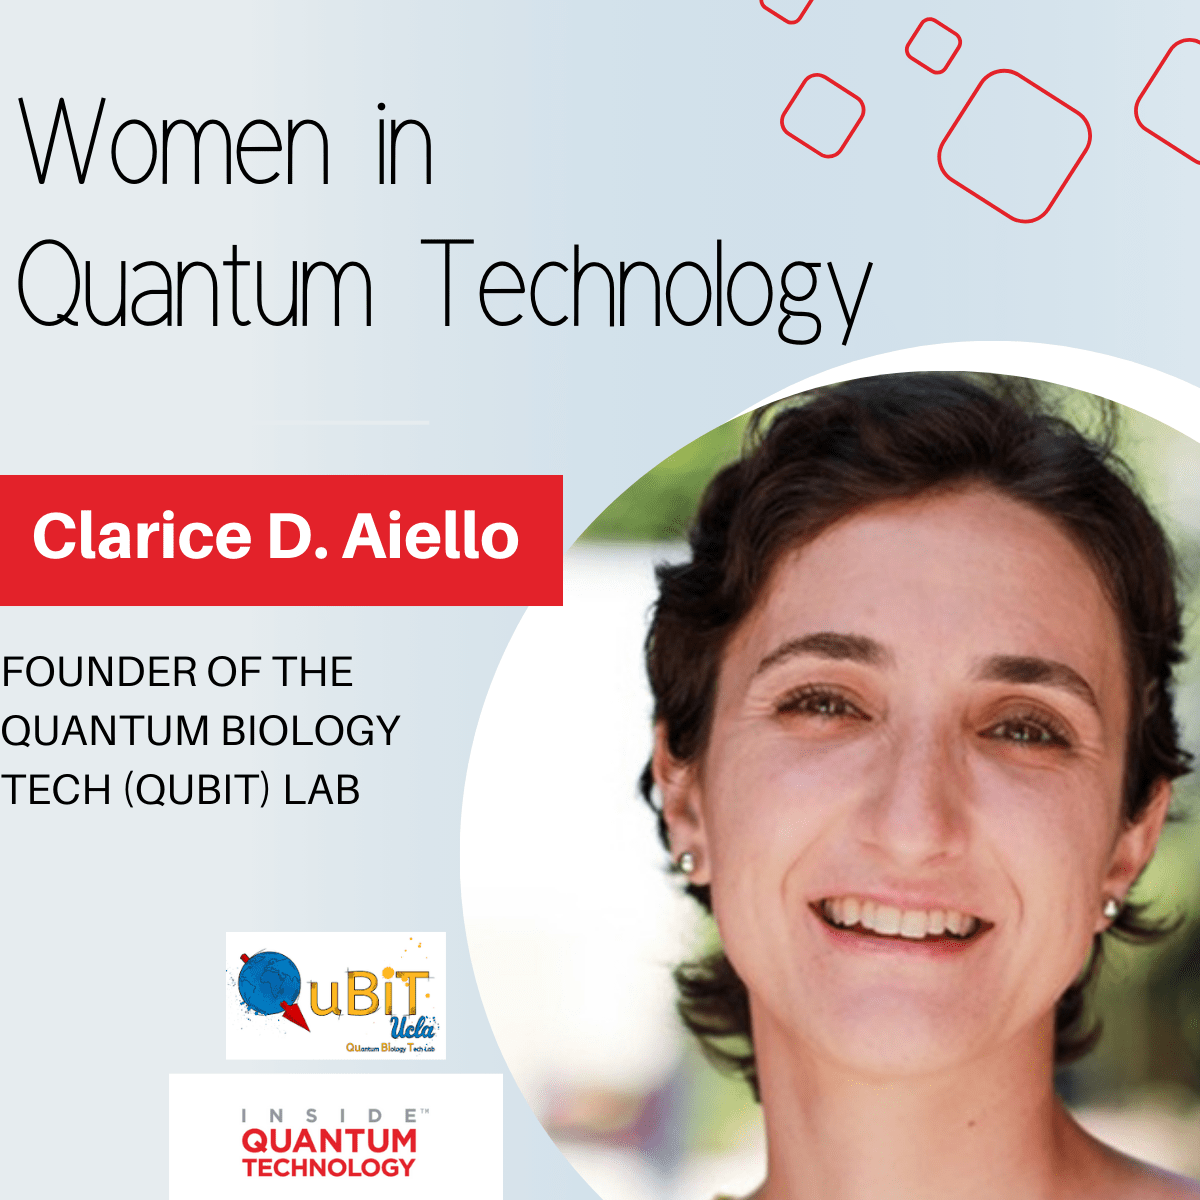 Dr. Clarice D. Aiello, founder of the QuBiT Lab, speaks about her journey into the quantum ecosystem.